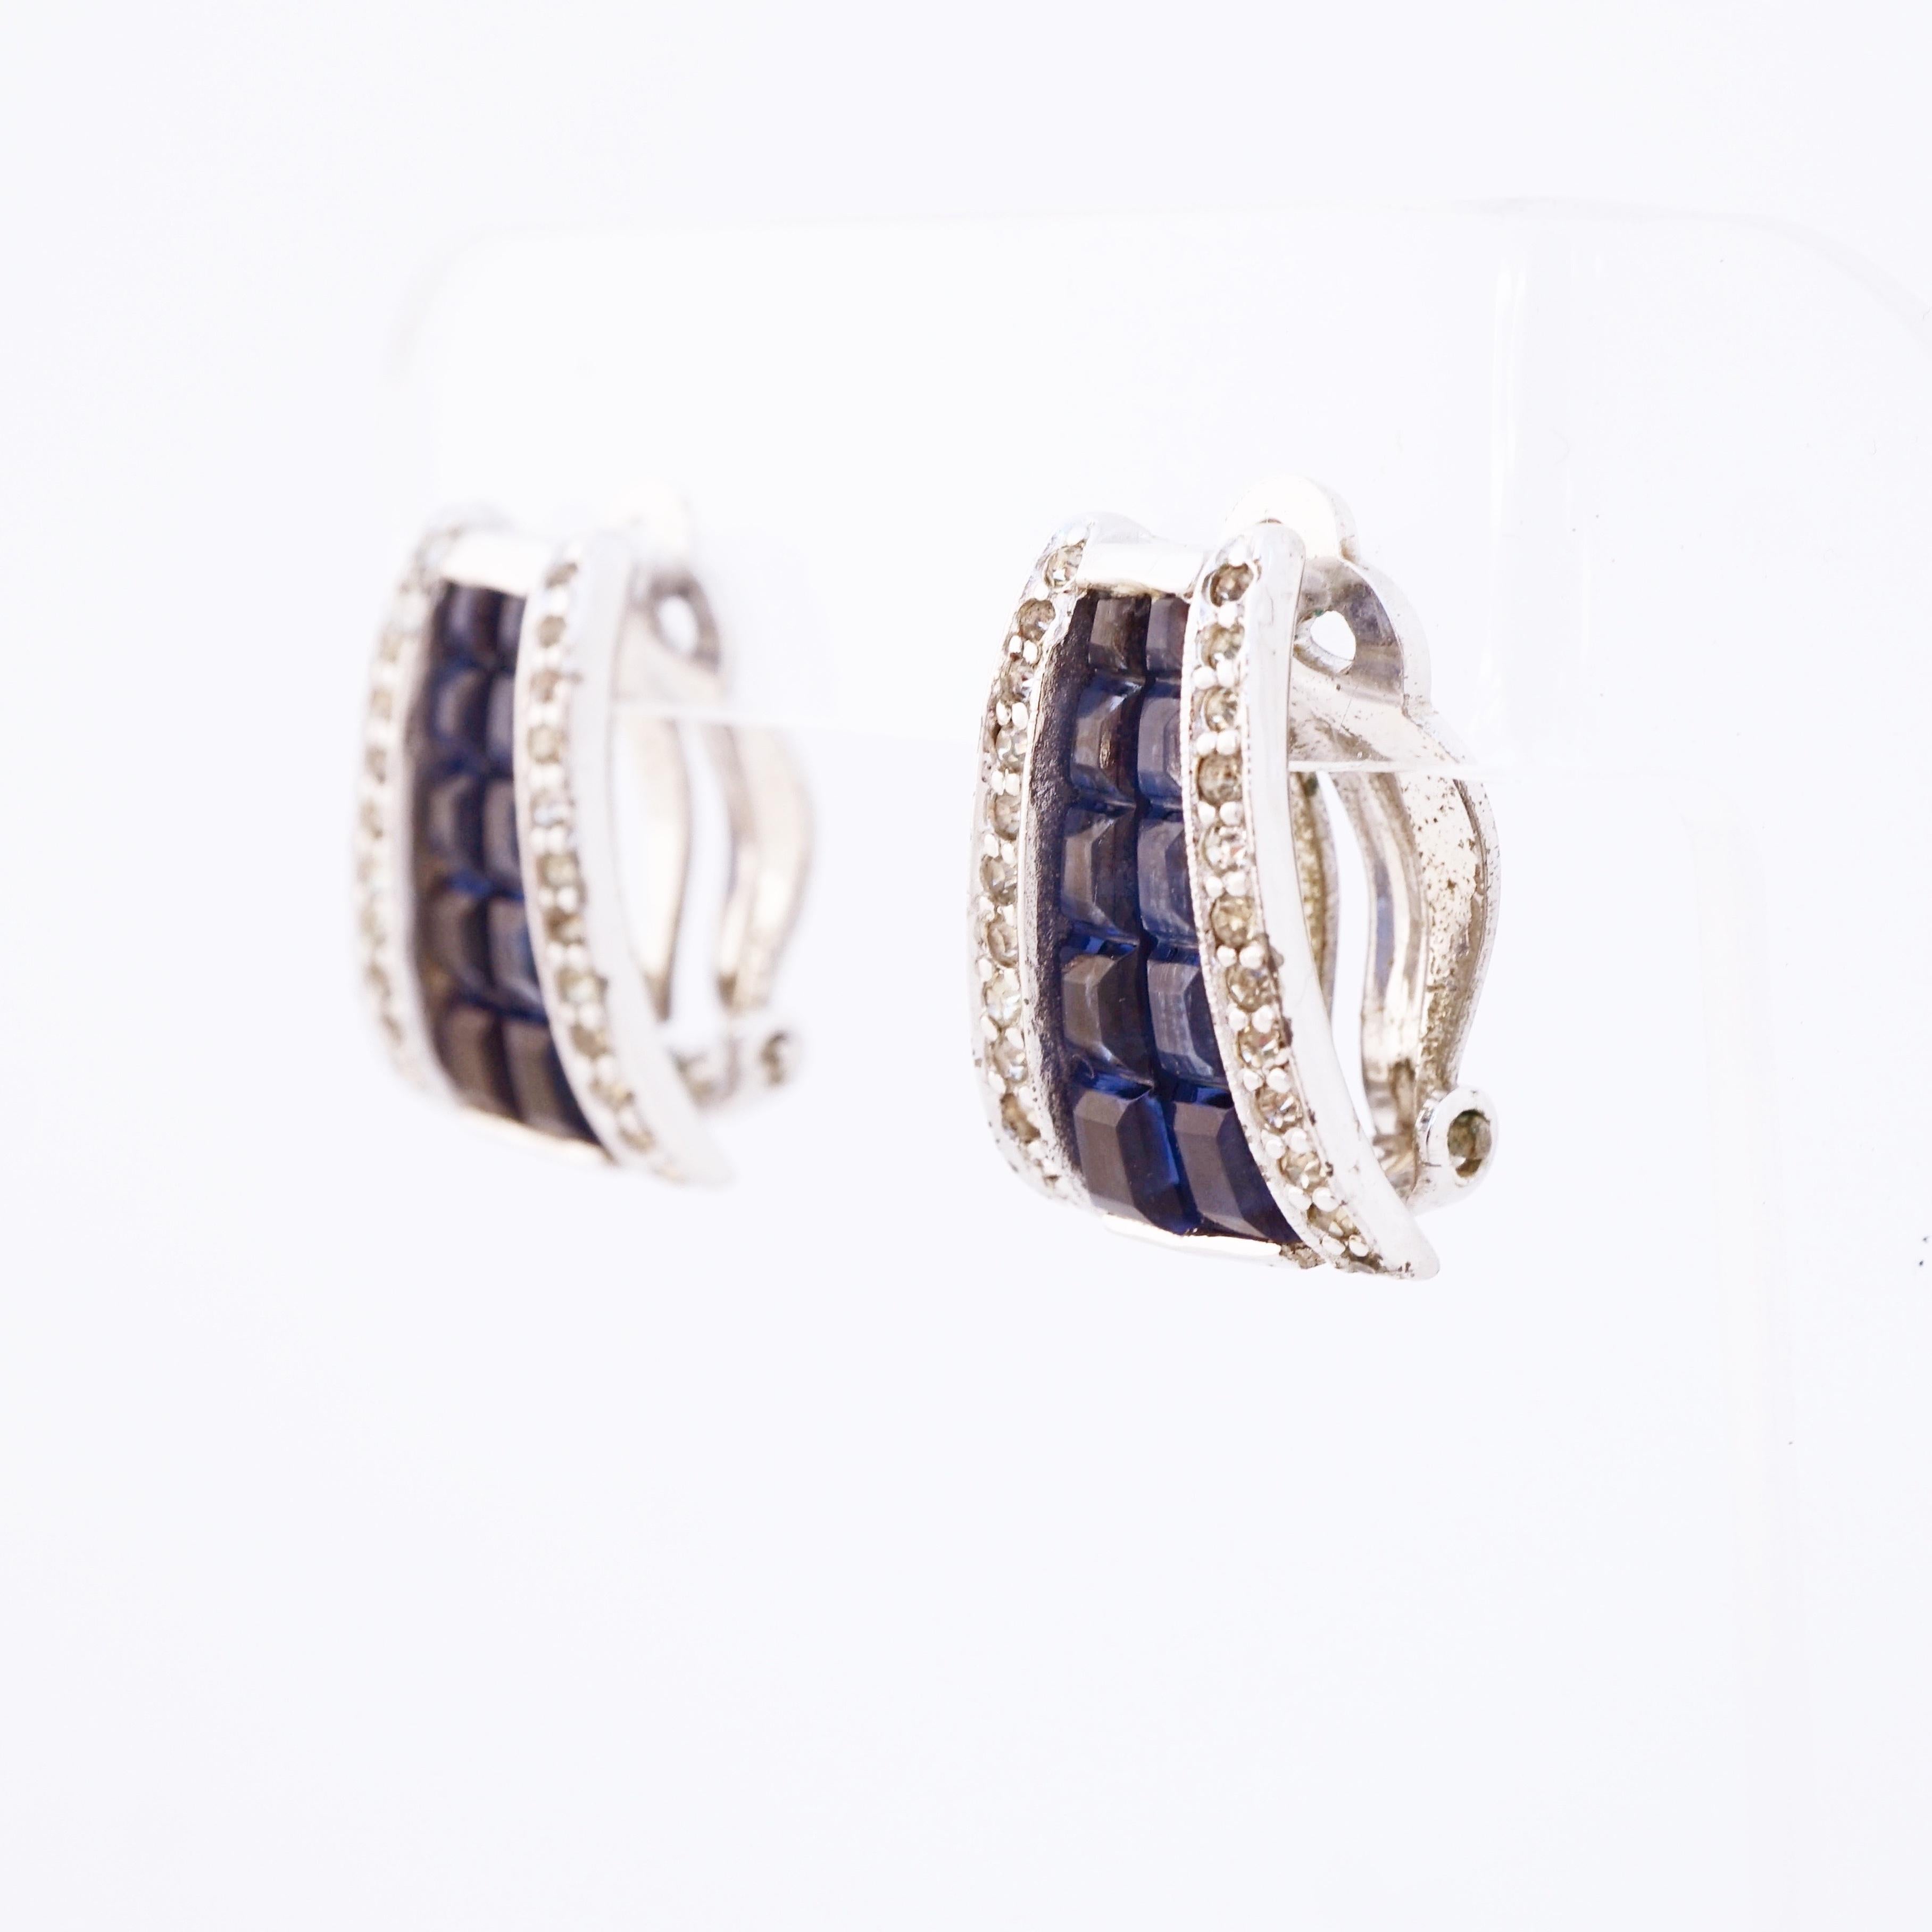 Modern Silver Art Deco Huggie Earrings With Sapphire Crystals By Jomaz, 1950s